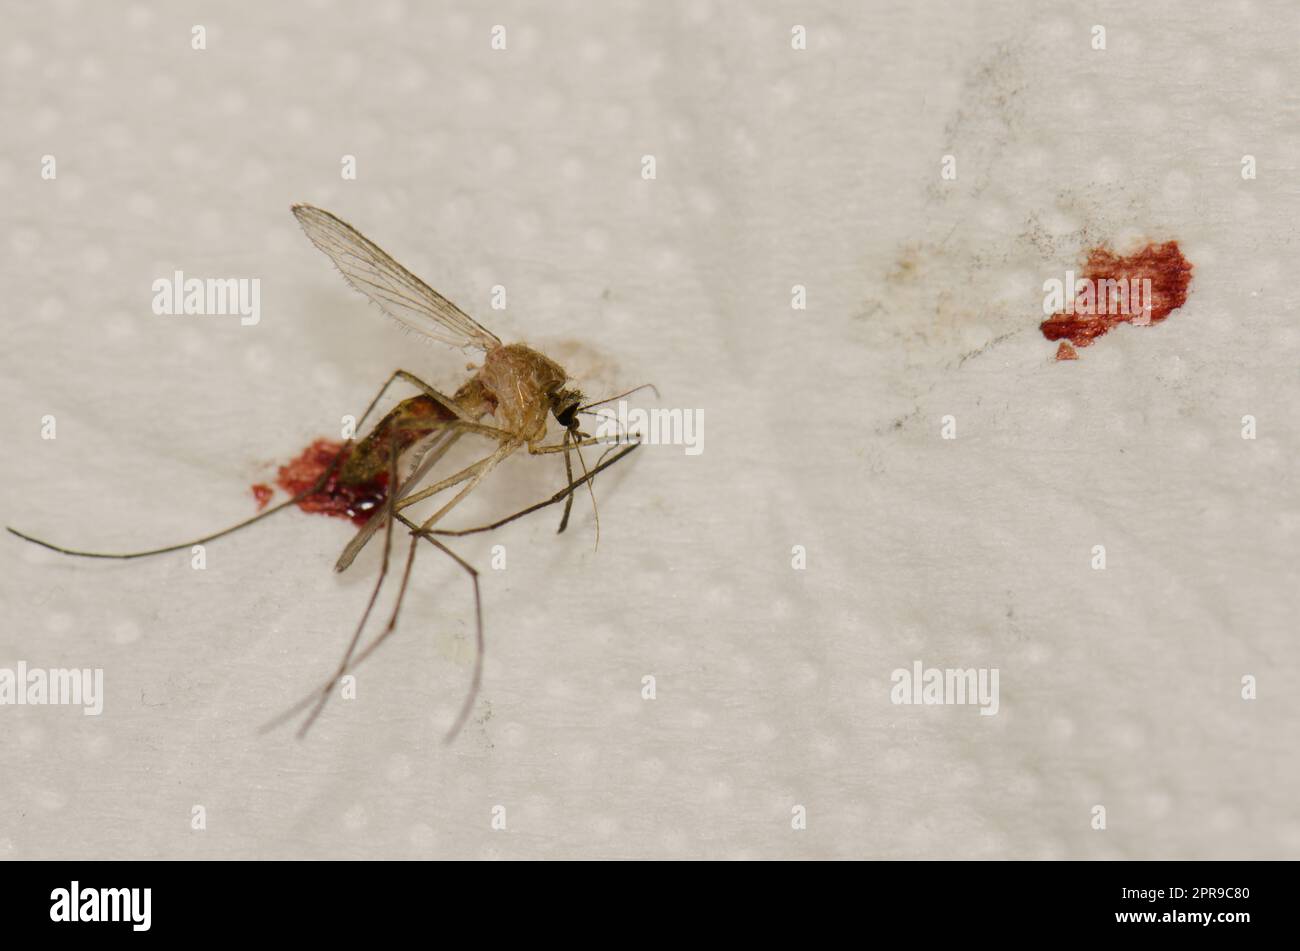 Crushed common house mosquito after feeding on a person's blood. Stock Photo